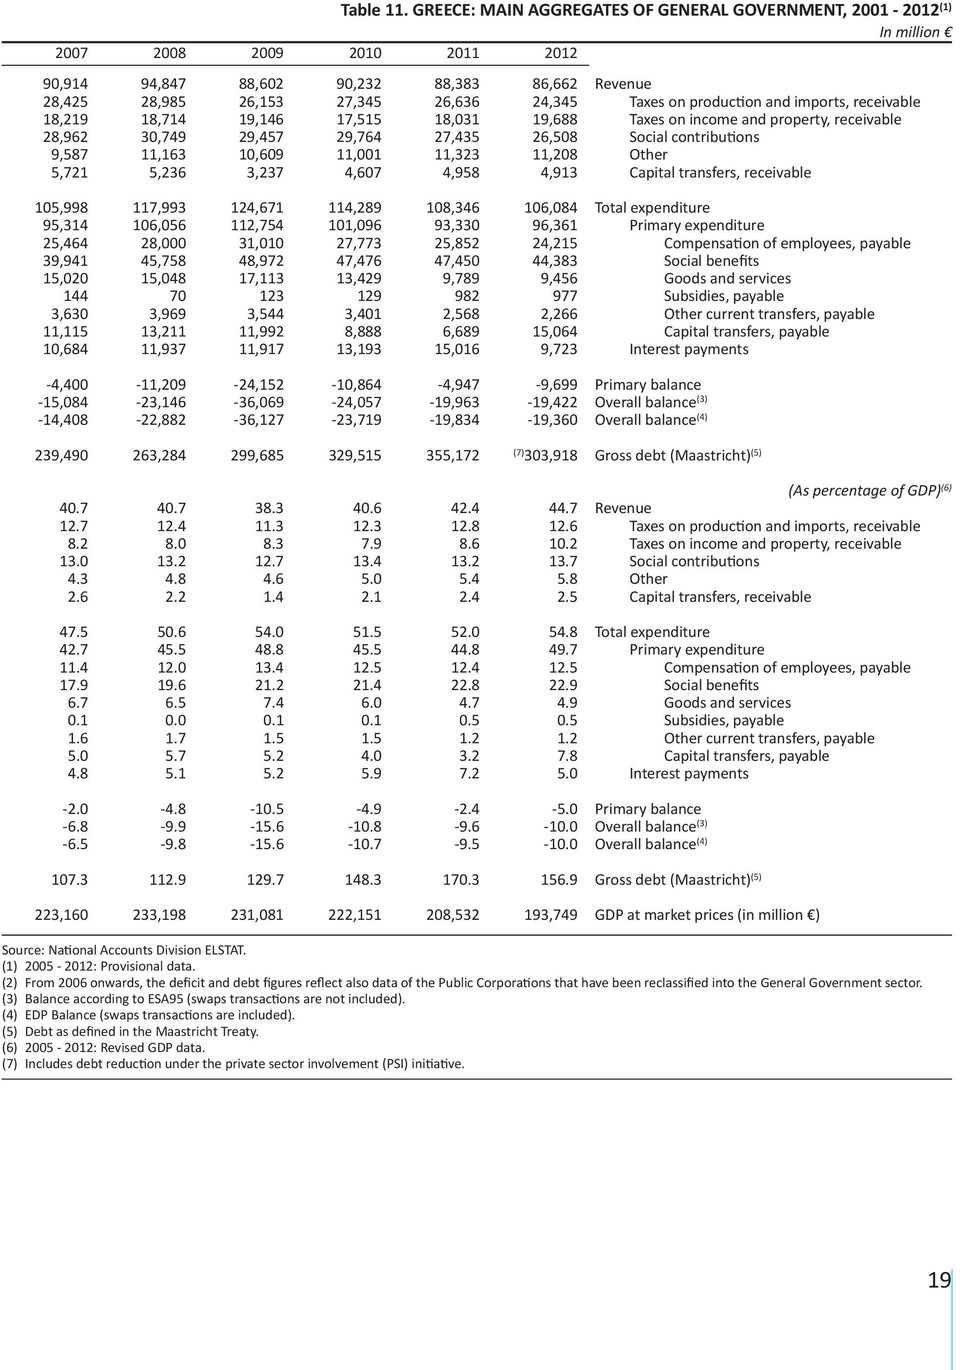 GREECE: MAIN AGGREGATES OF GENERAL GOVERNMENT, 2001 - (1) In million Revenue Taxes on production and imports, receivable Taxes on income and property, receivable Social contributions Other Capital